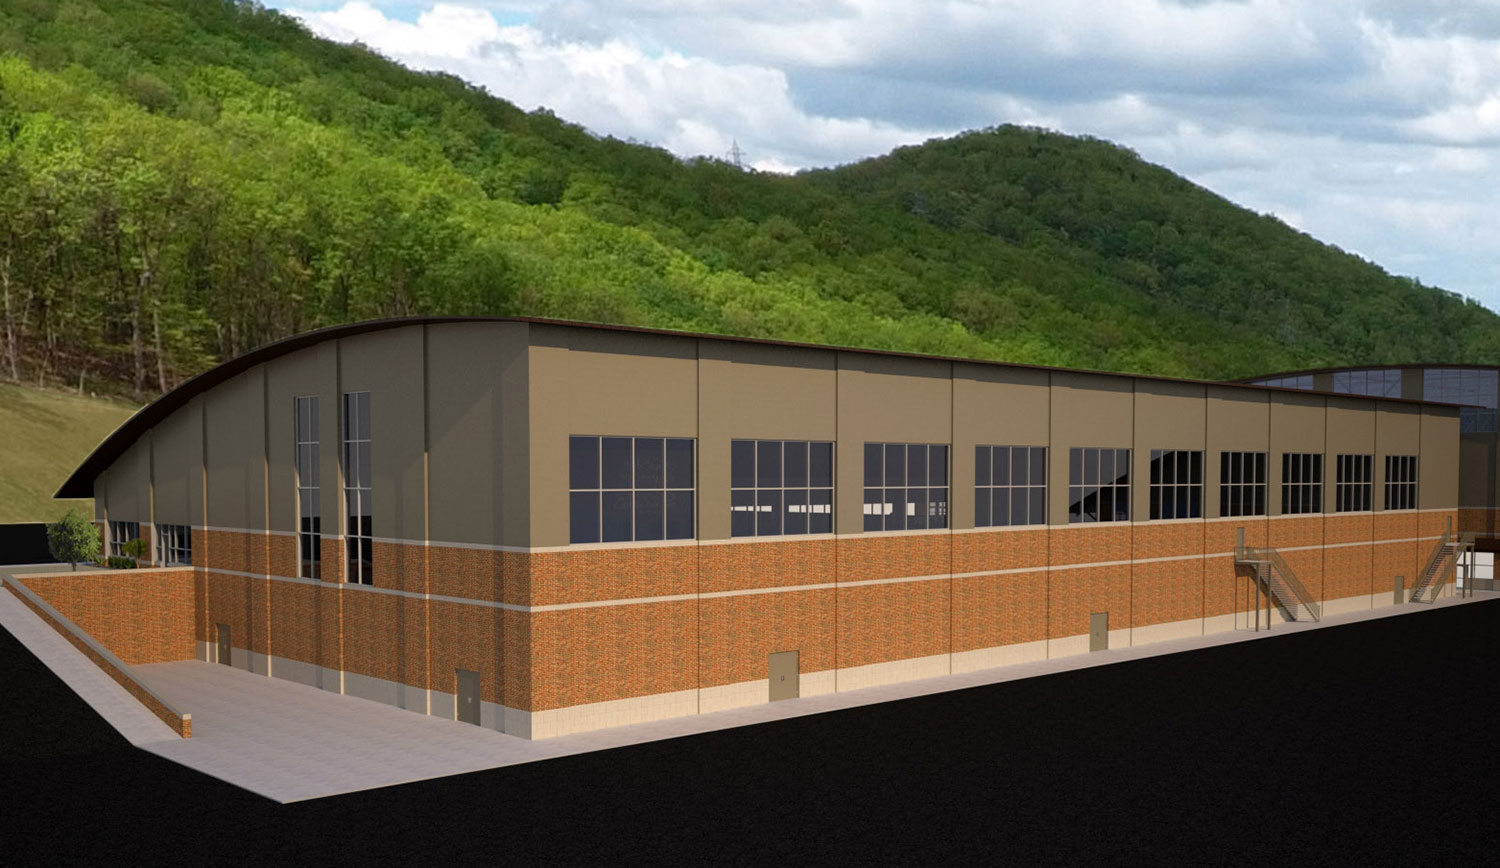 Liberty's forthcoming natatorium will be connected to the new indoor track & field facility at the base of Liberty Mountain.